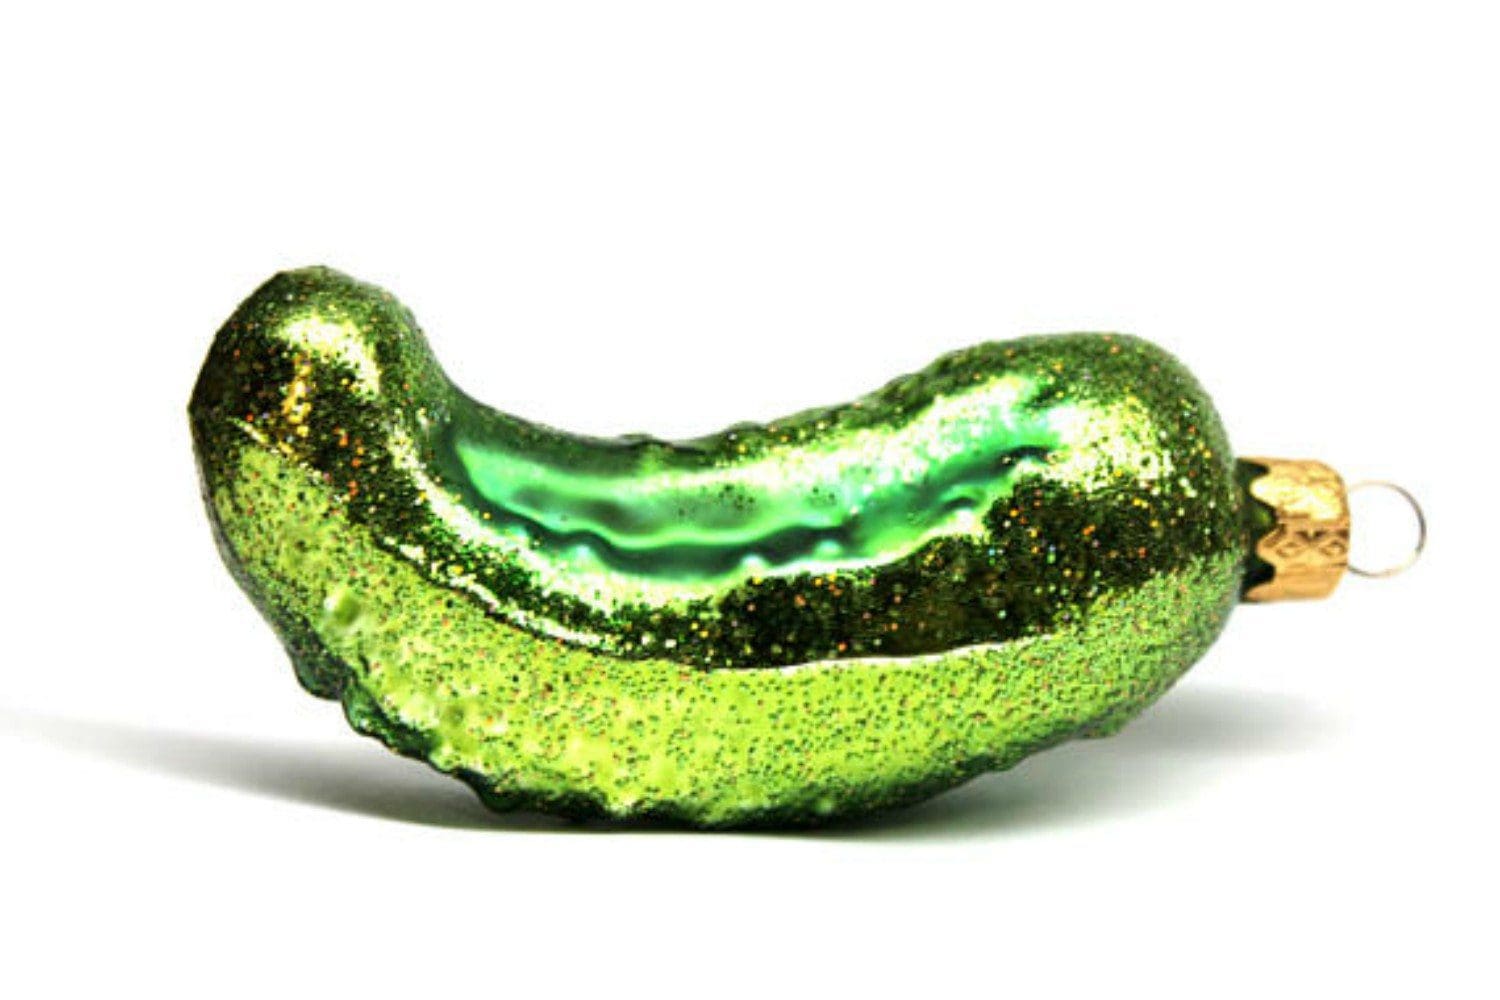 Featured image for “The Christmas Pickle: The Search for the Truth”